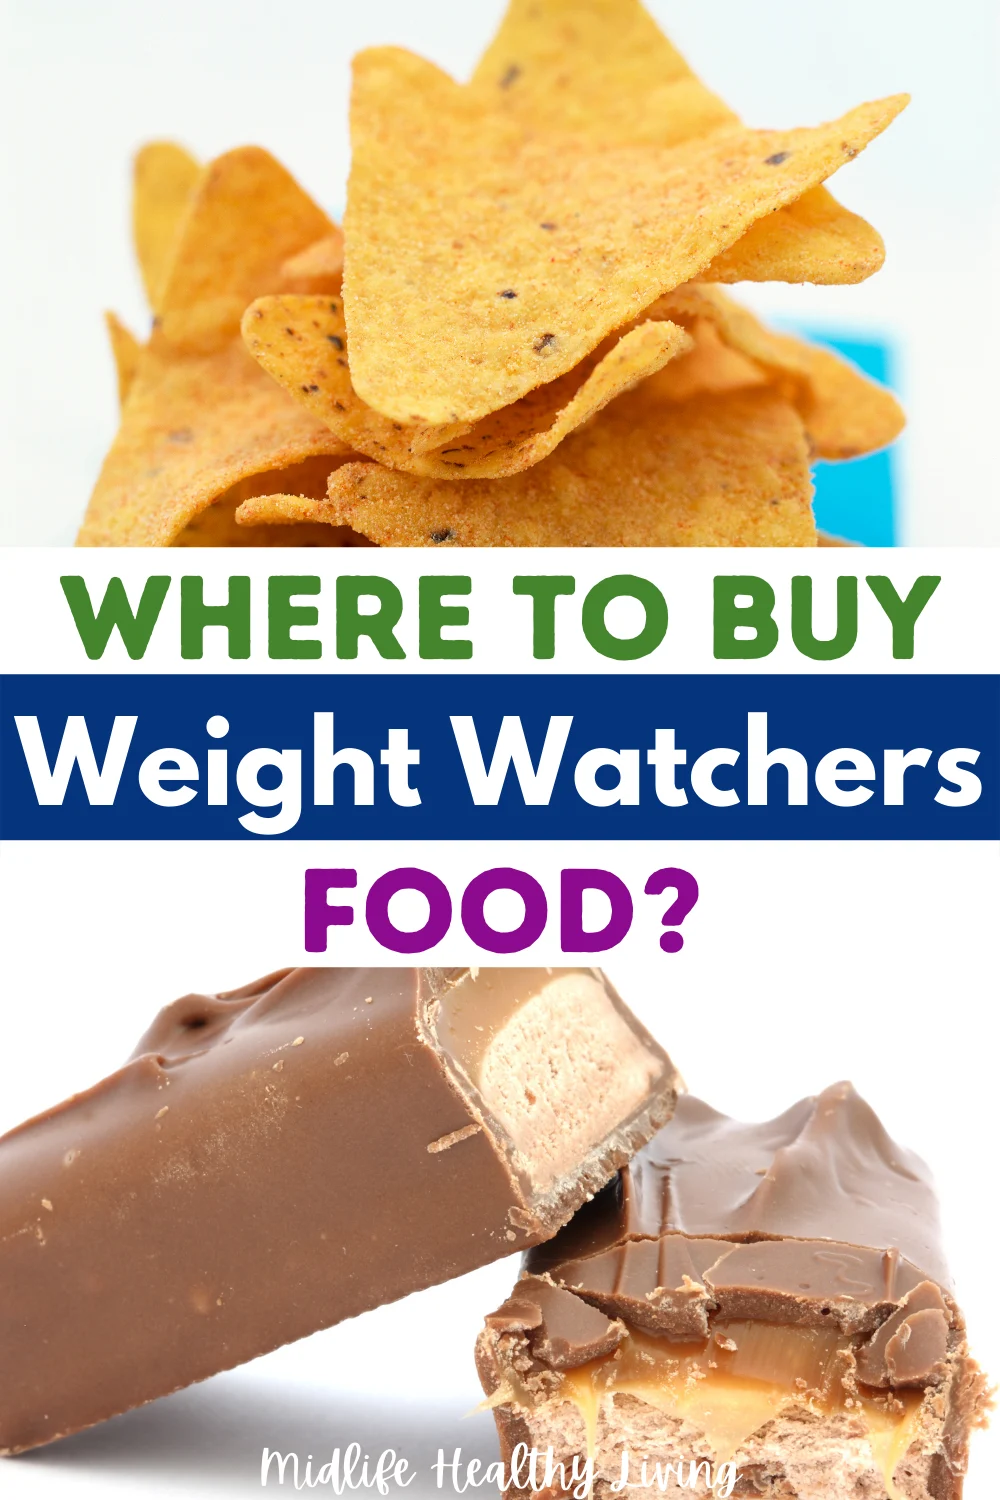 Where to Buy Weight Watchers Food